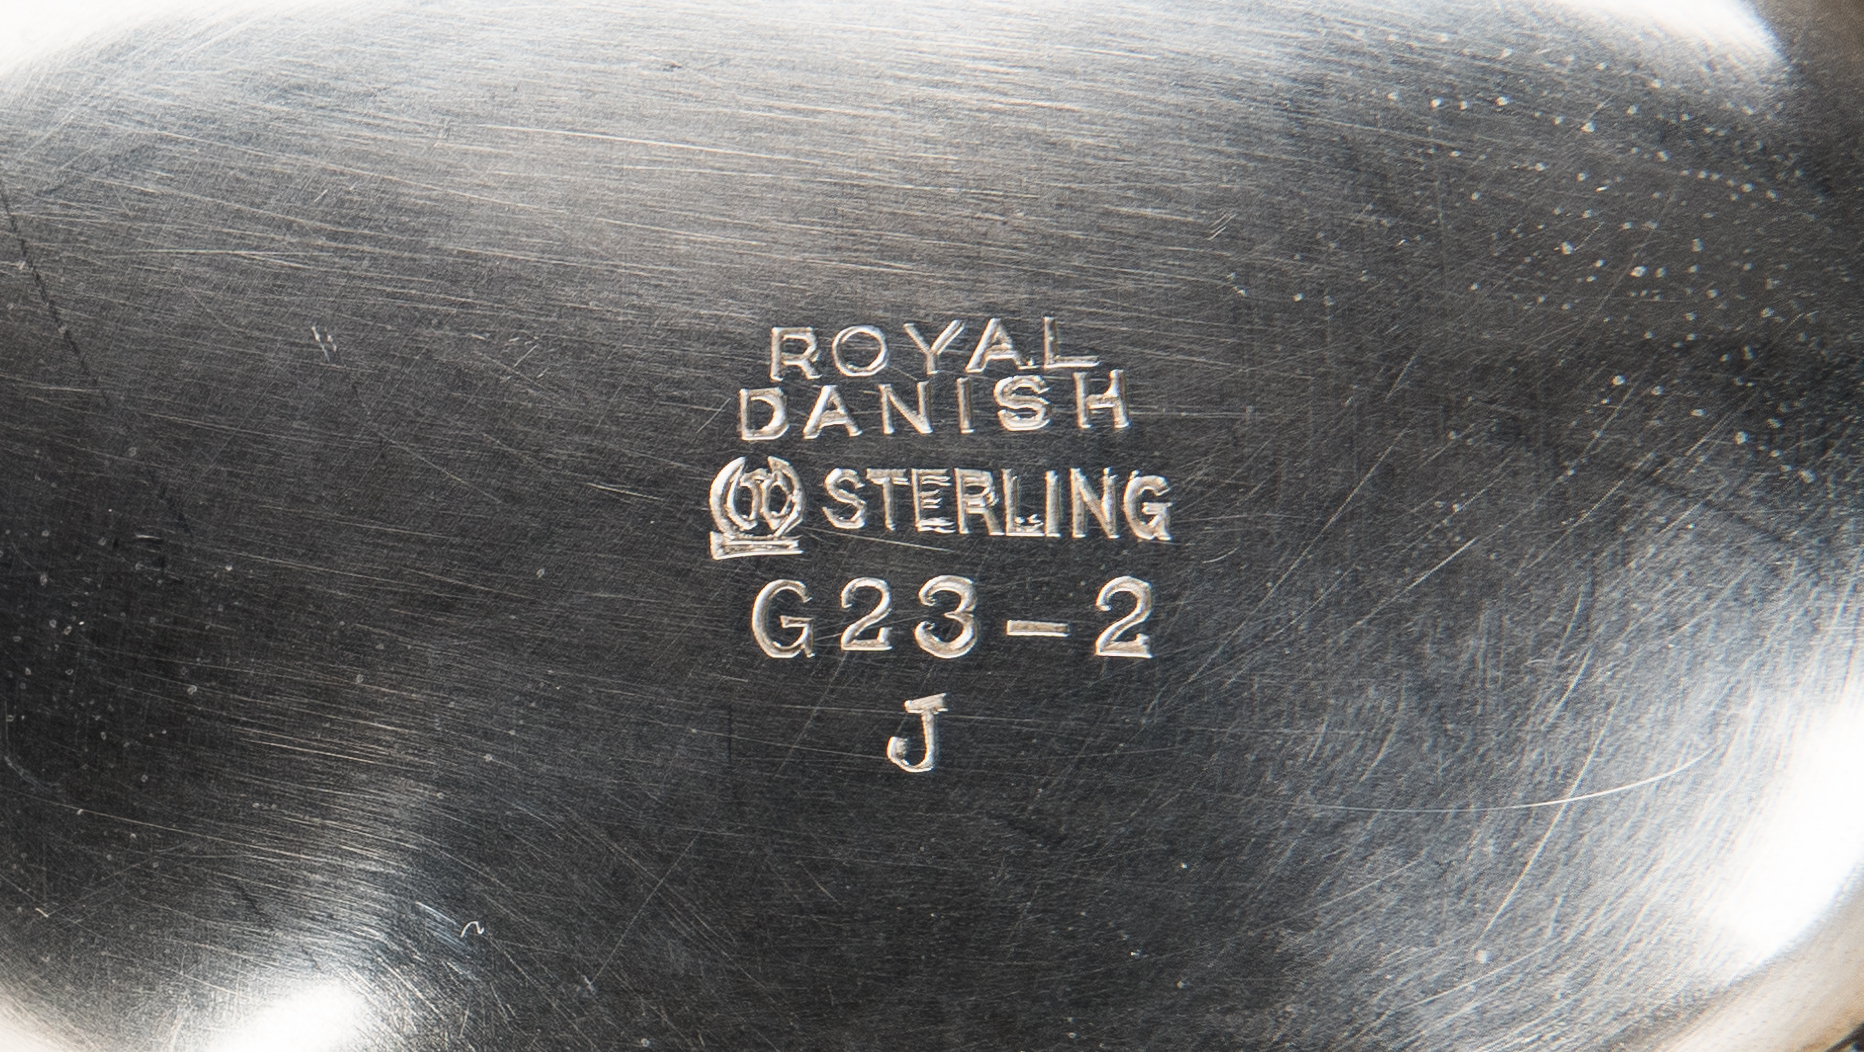 Lot 355: 12 Sterling Table Items incl. Royal Danish